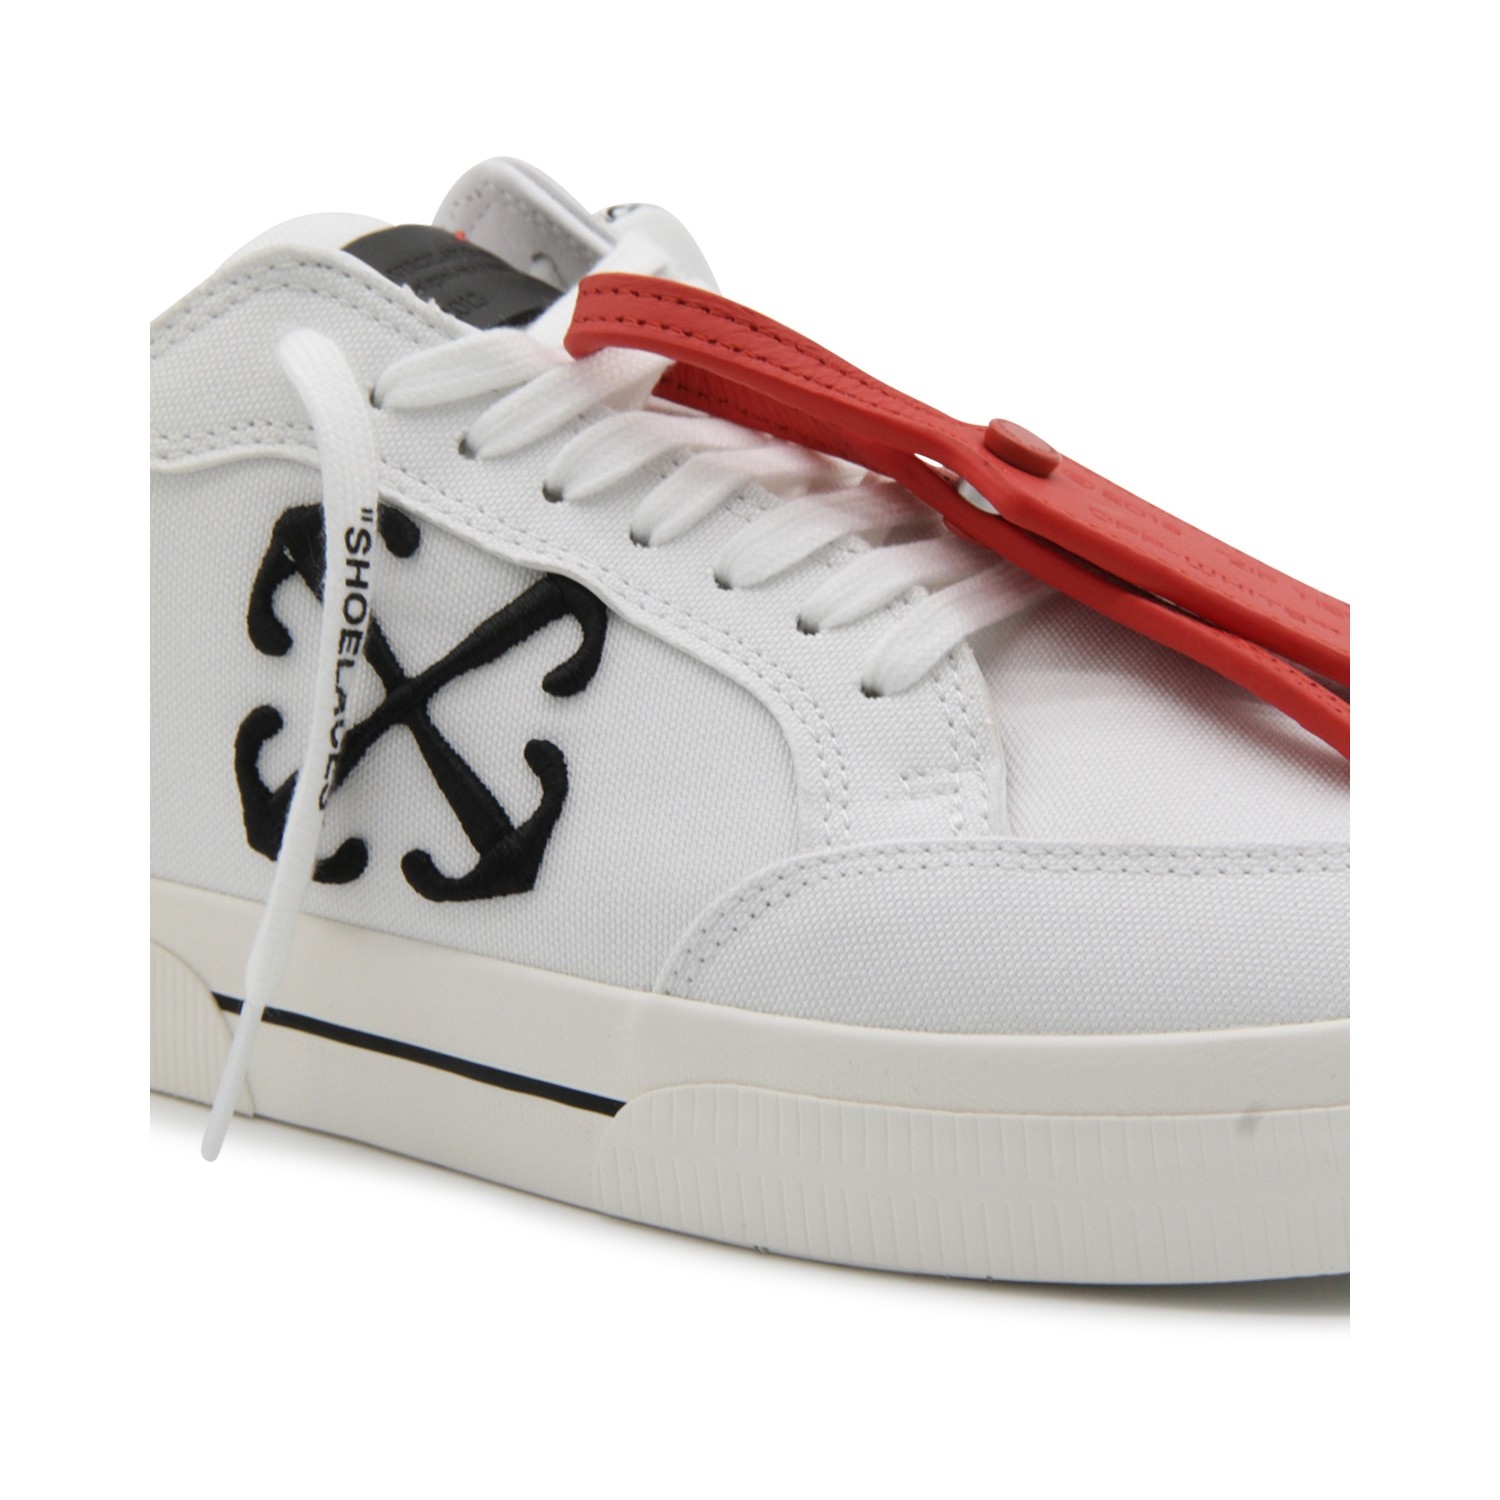 WHITE AND BLACK CANVAS VULCANIZED SNEAKERS - 4